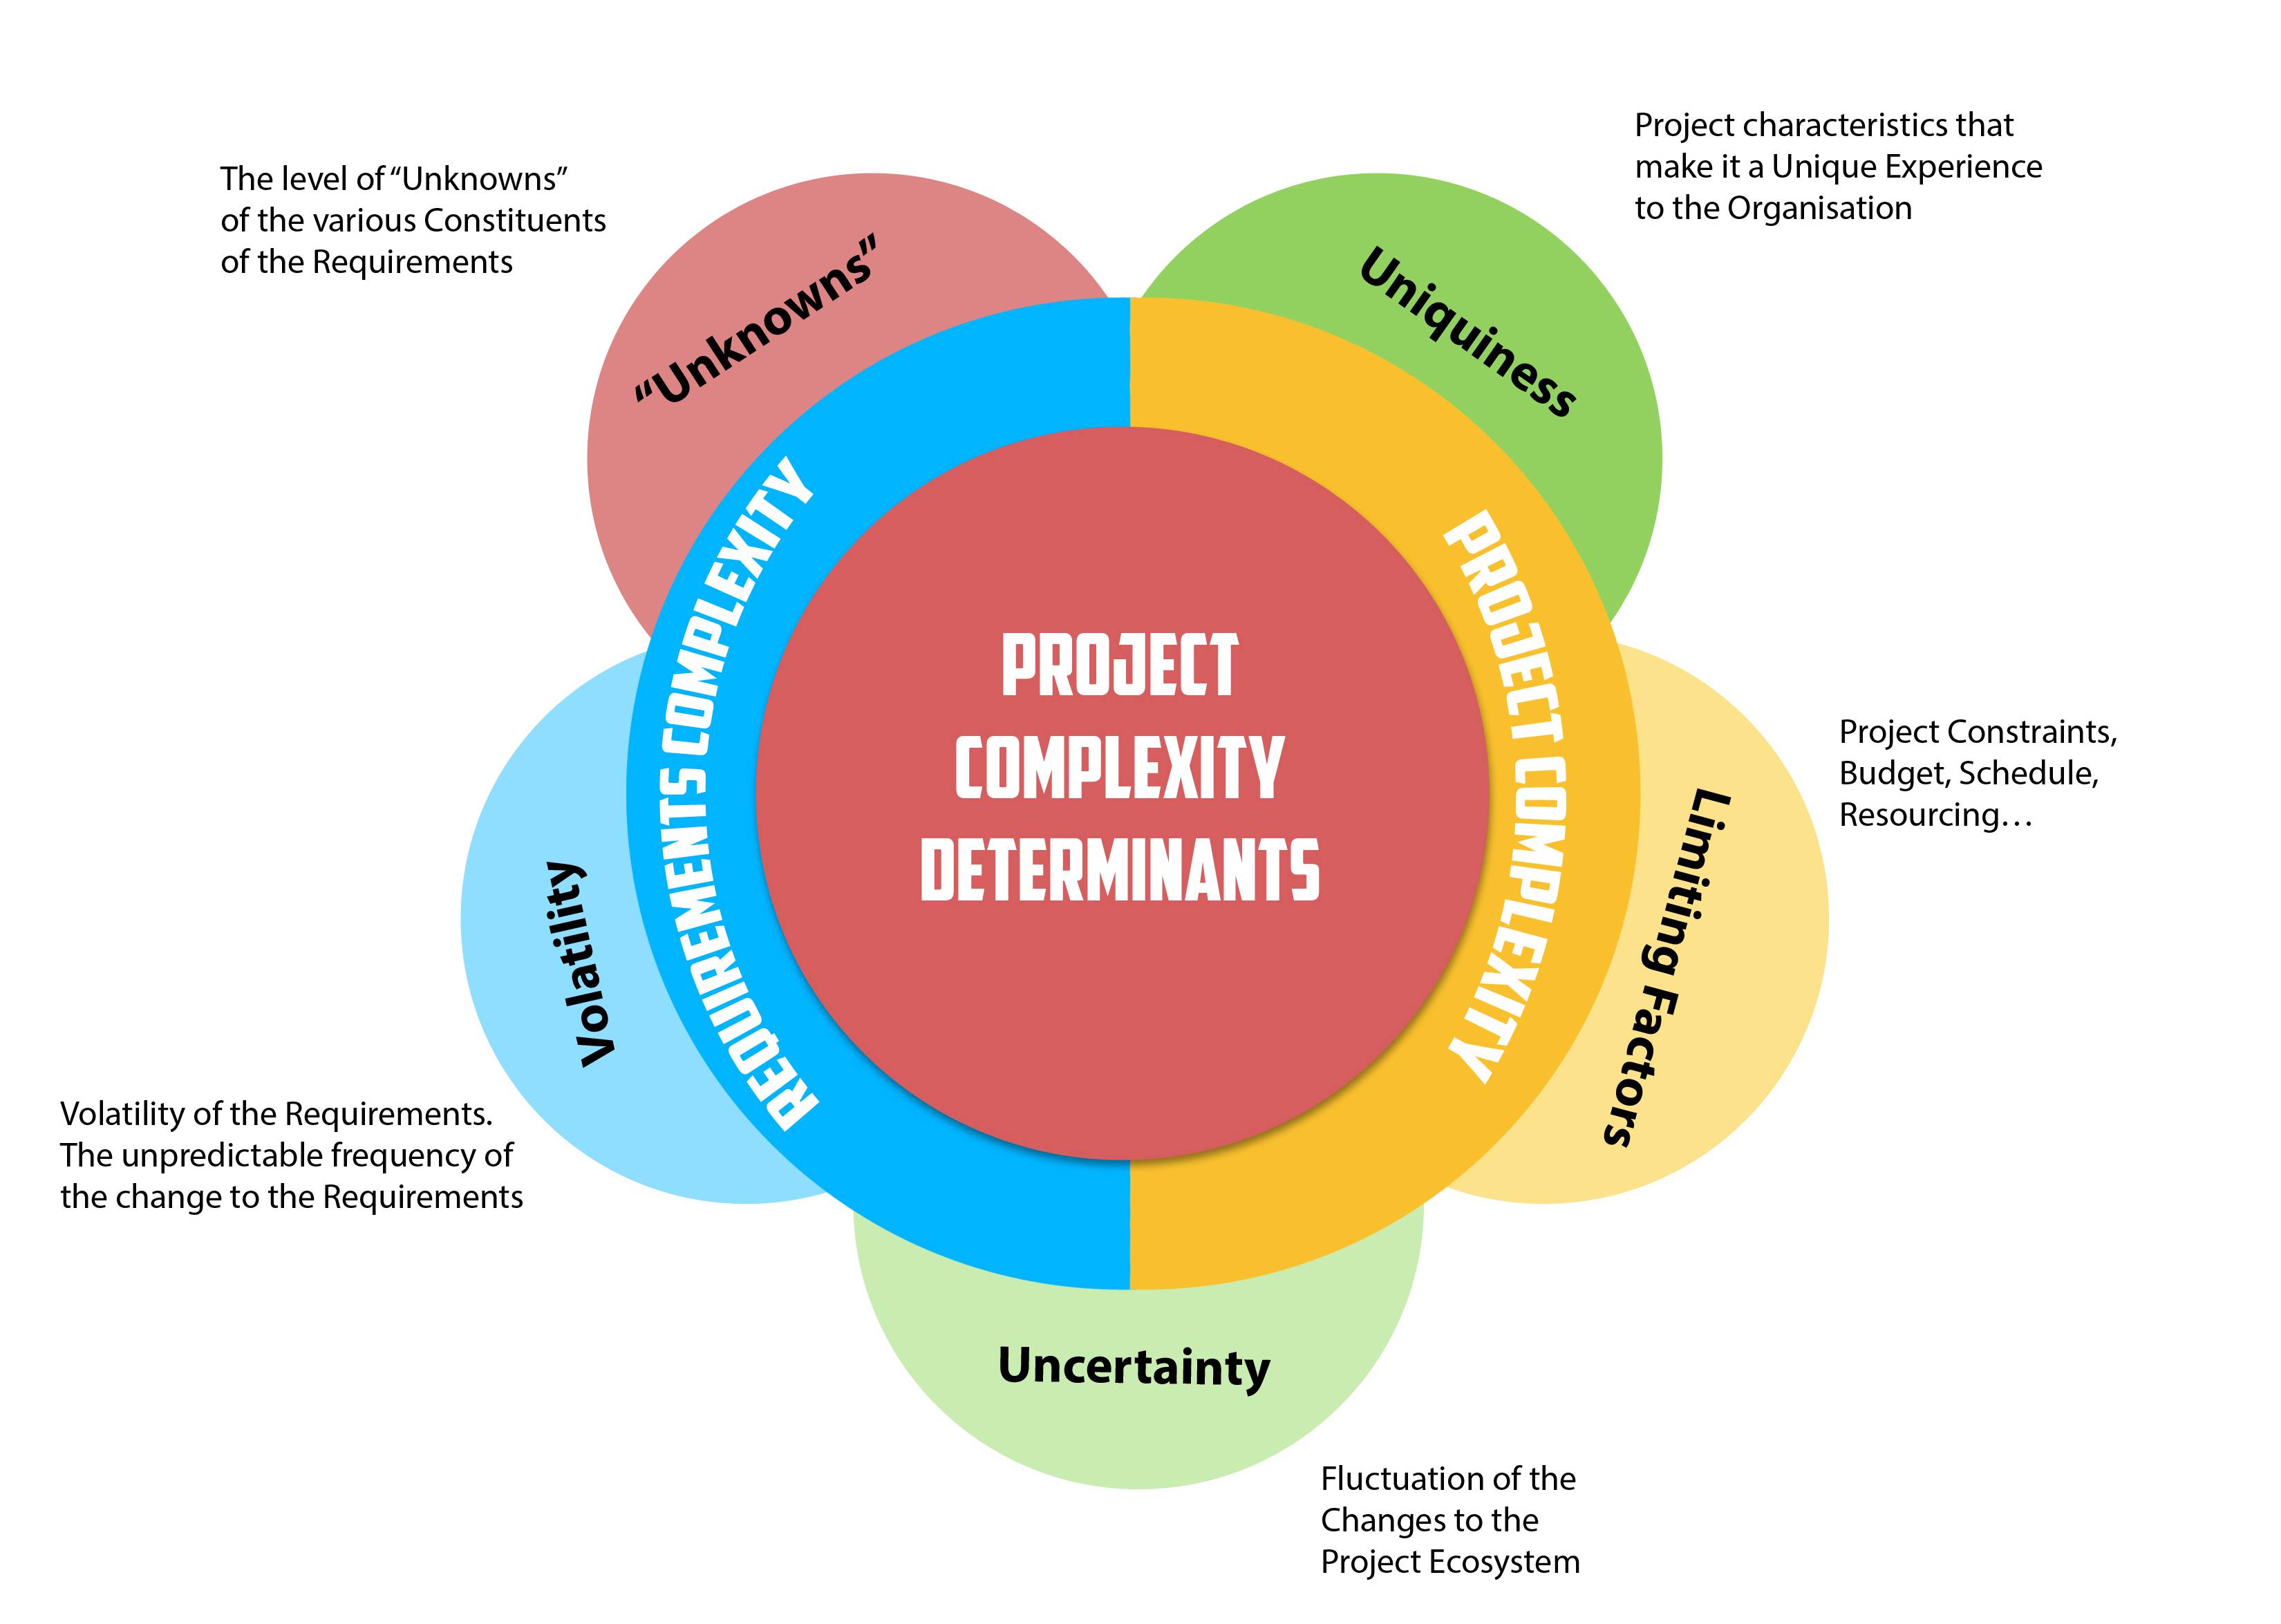 Project Complexity Determinants